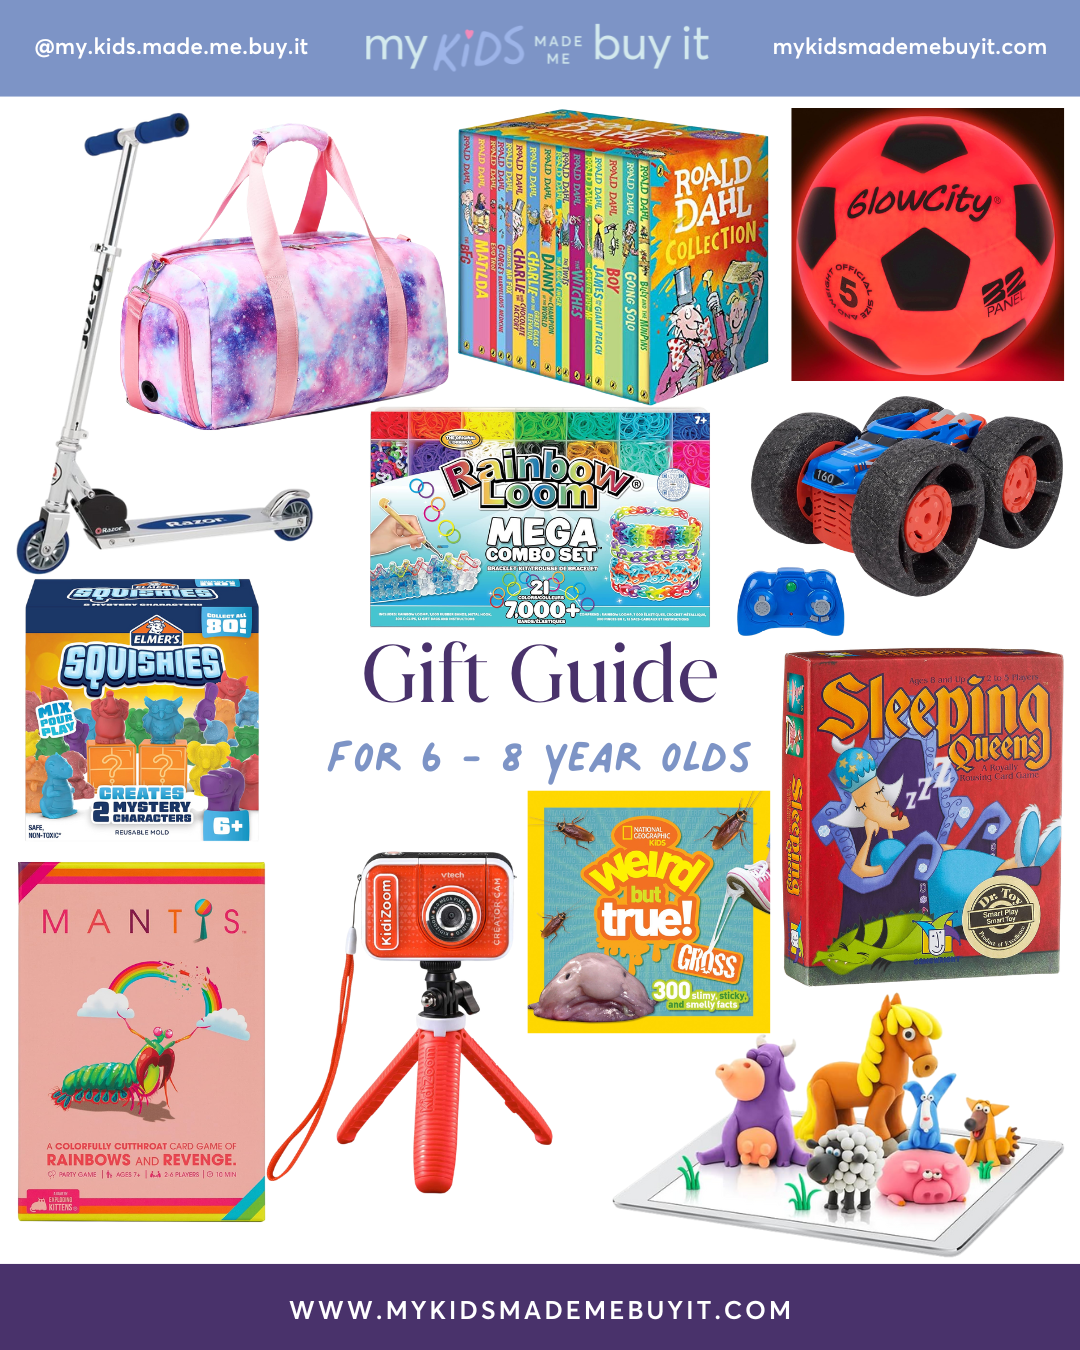 Gifts for 6 - 8 Year Olds